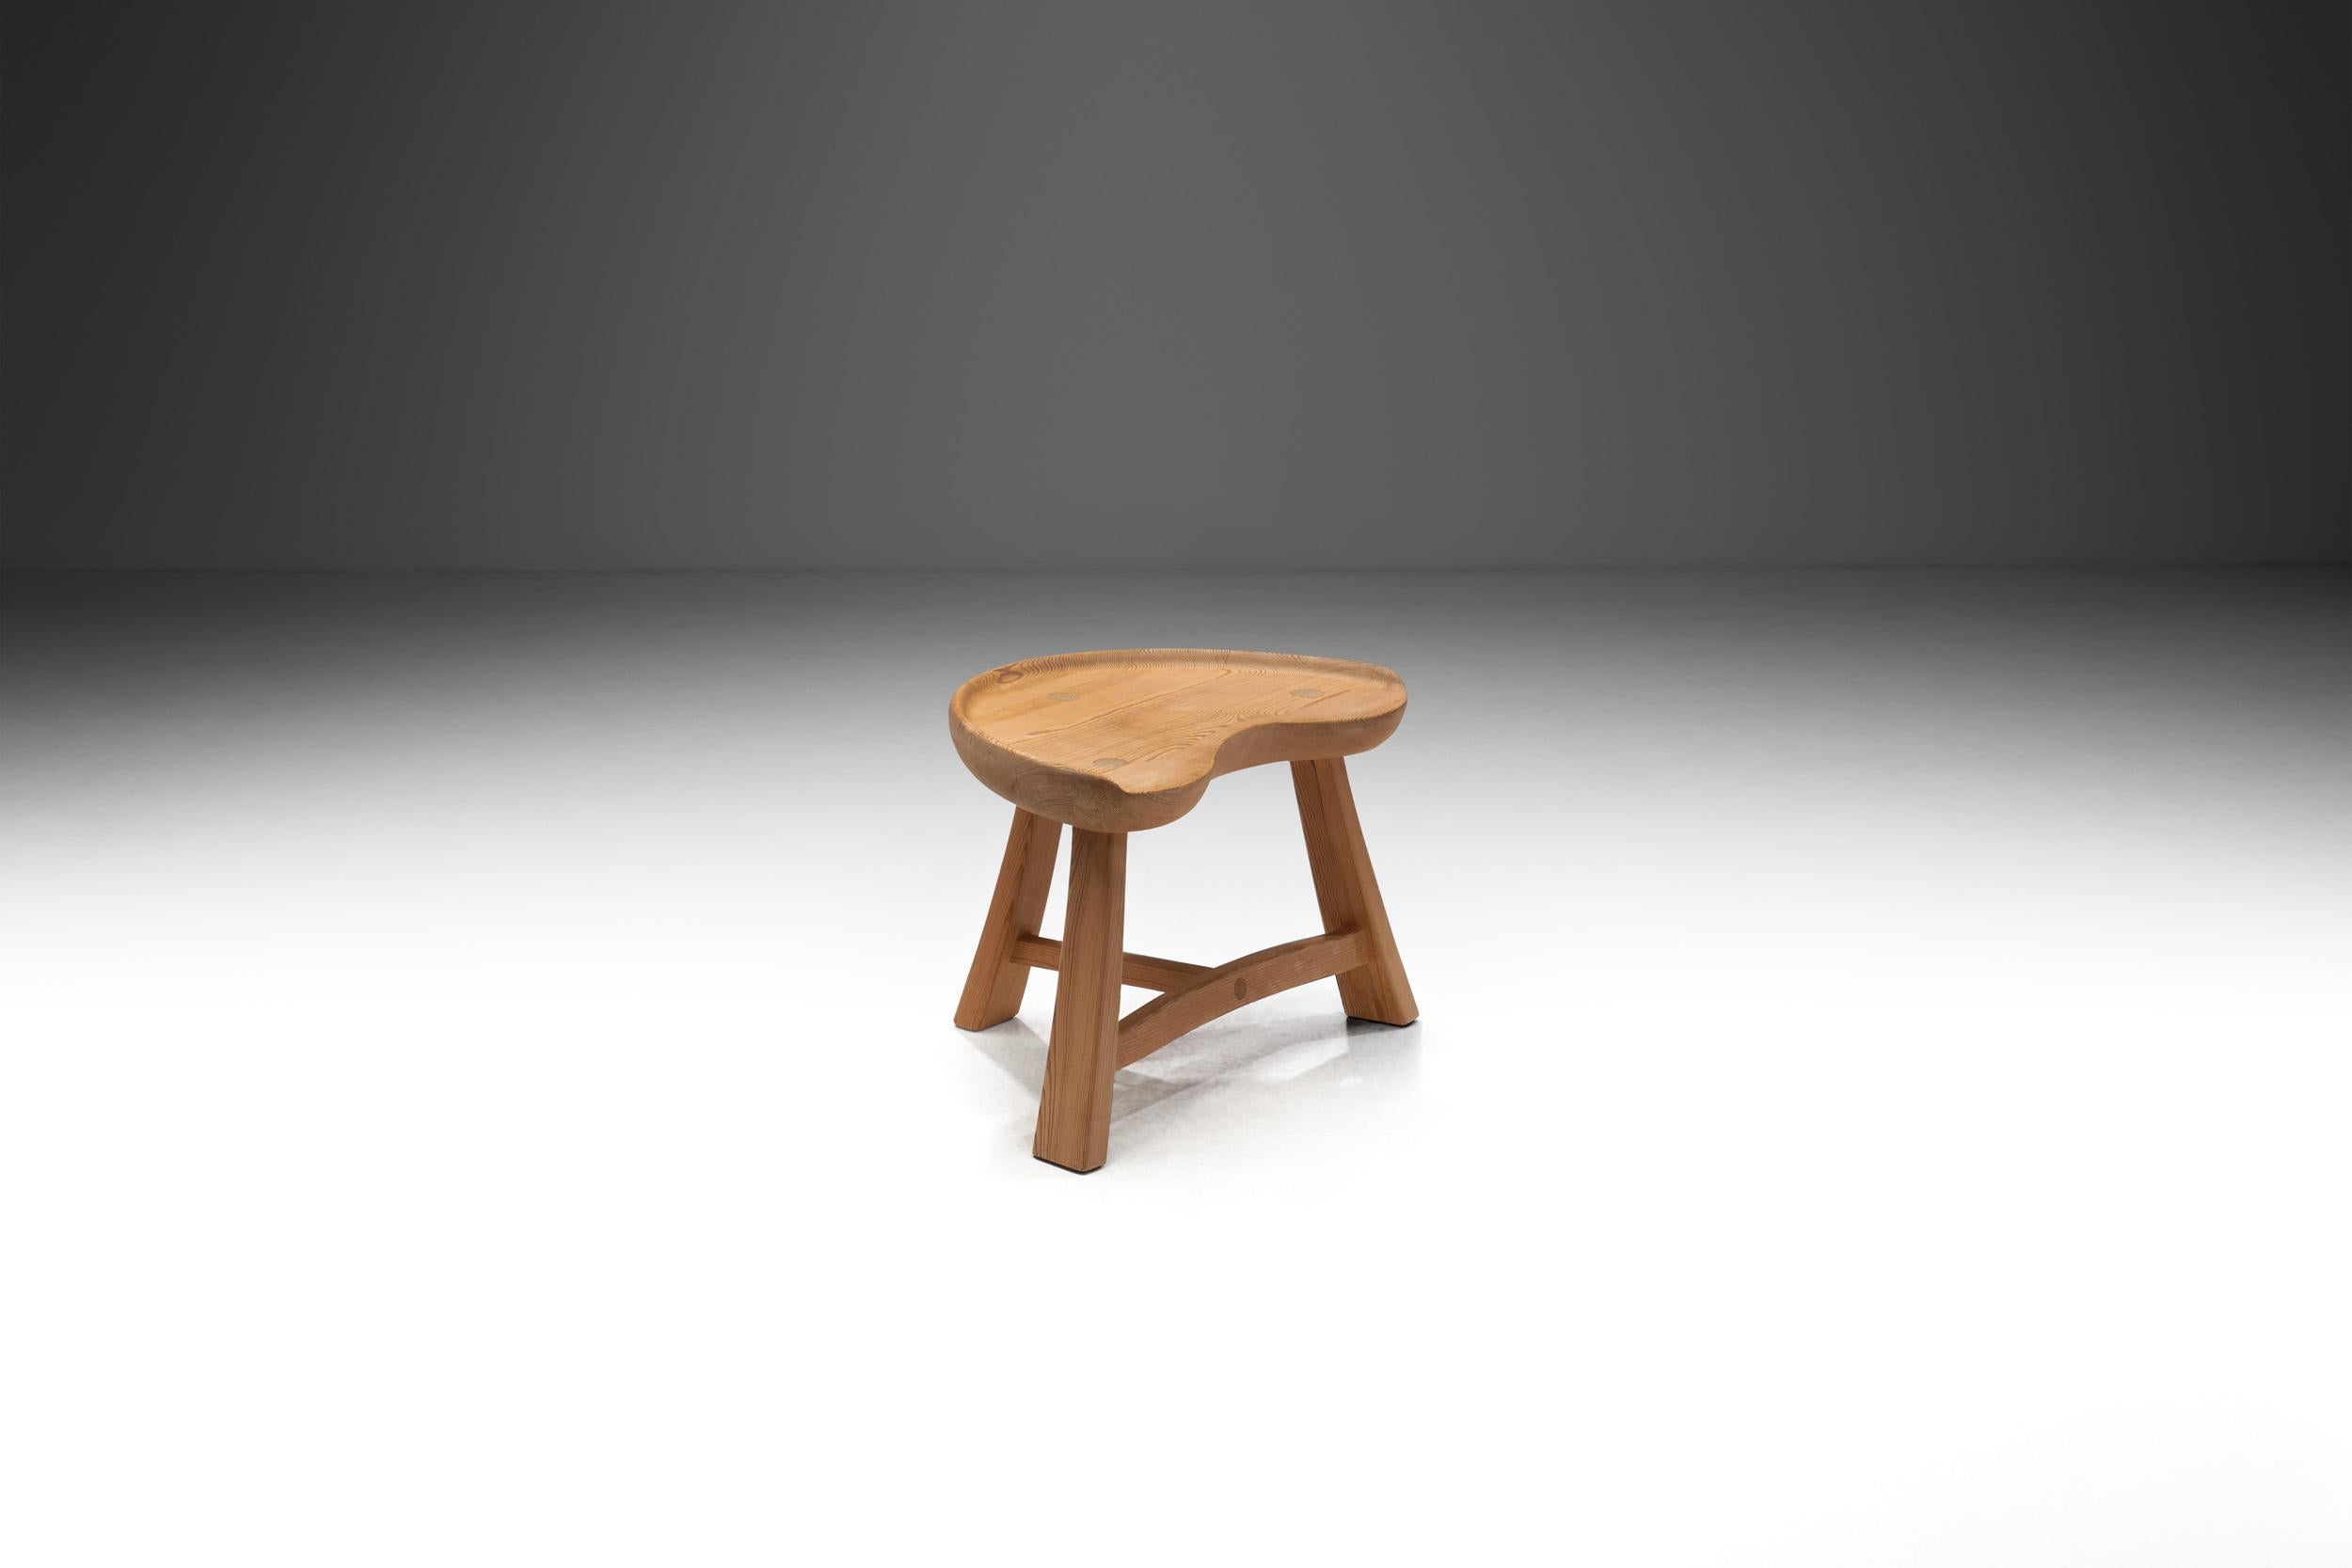 What makes wood so appealing besides its natural beauty is the ease in which it can be cut and the array of beautiful shapes that can be sculpted from it. This mid-century stool known as “Fjøskrakk (barn stool)” Mod. 522, was created by Krogenæs